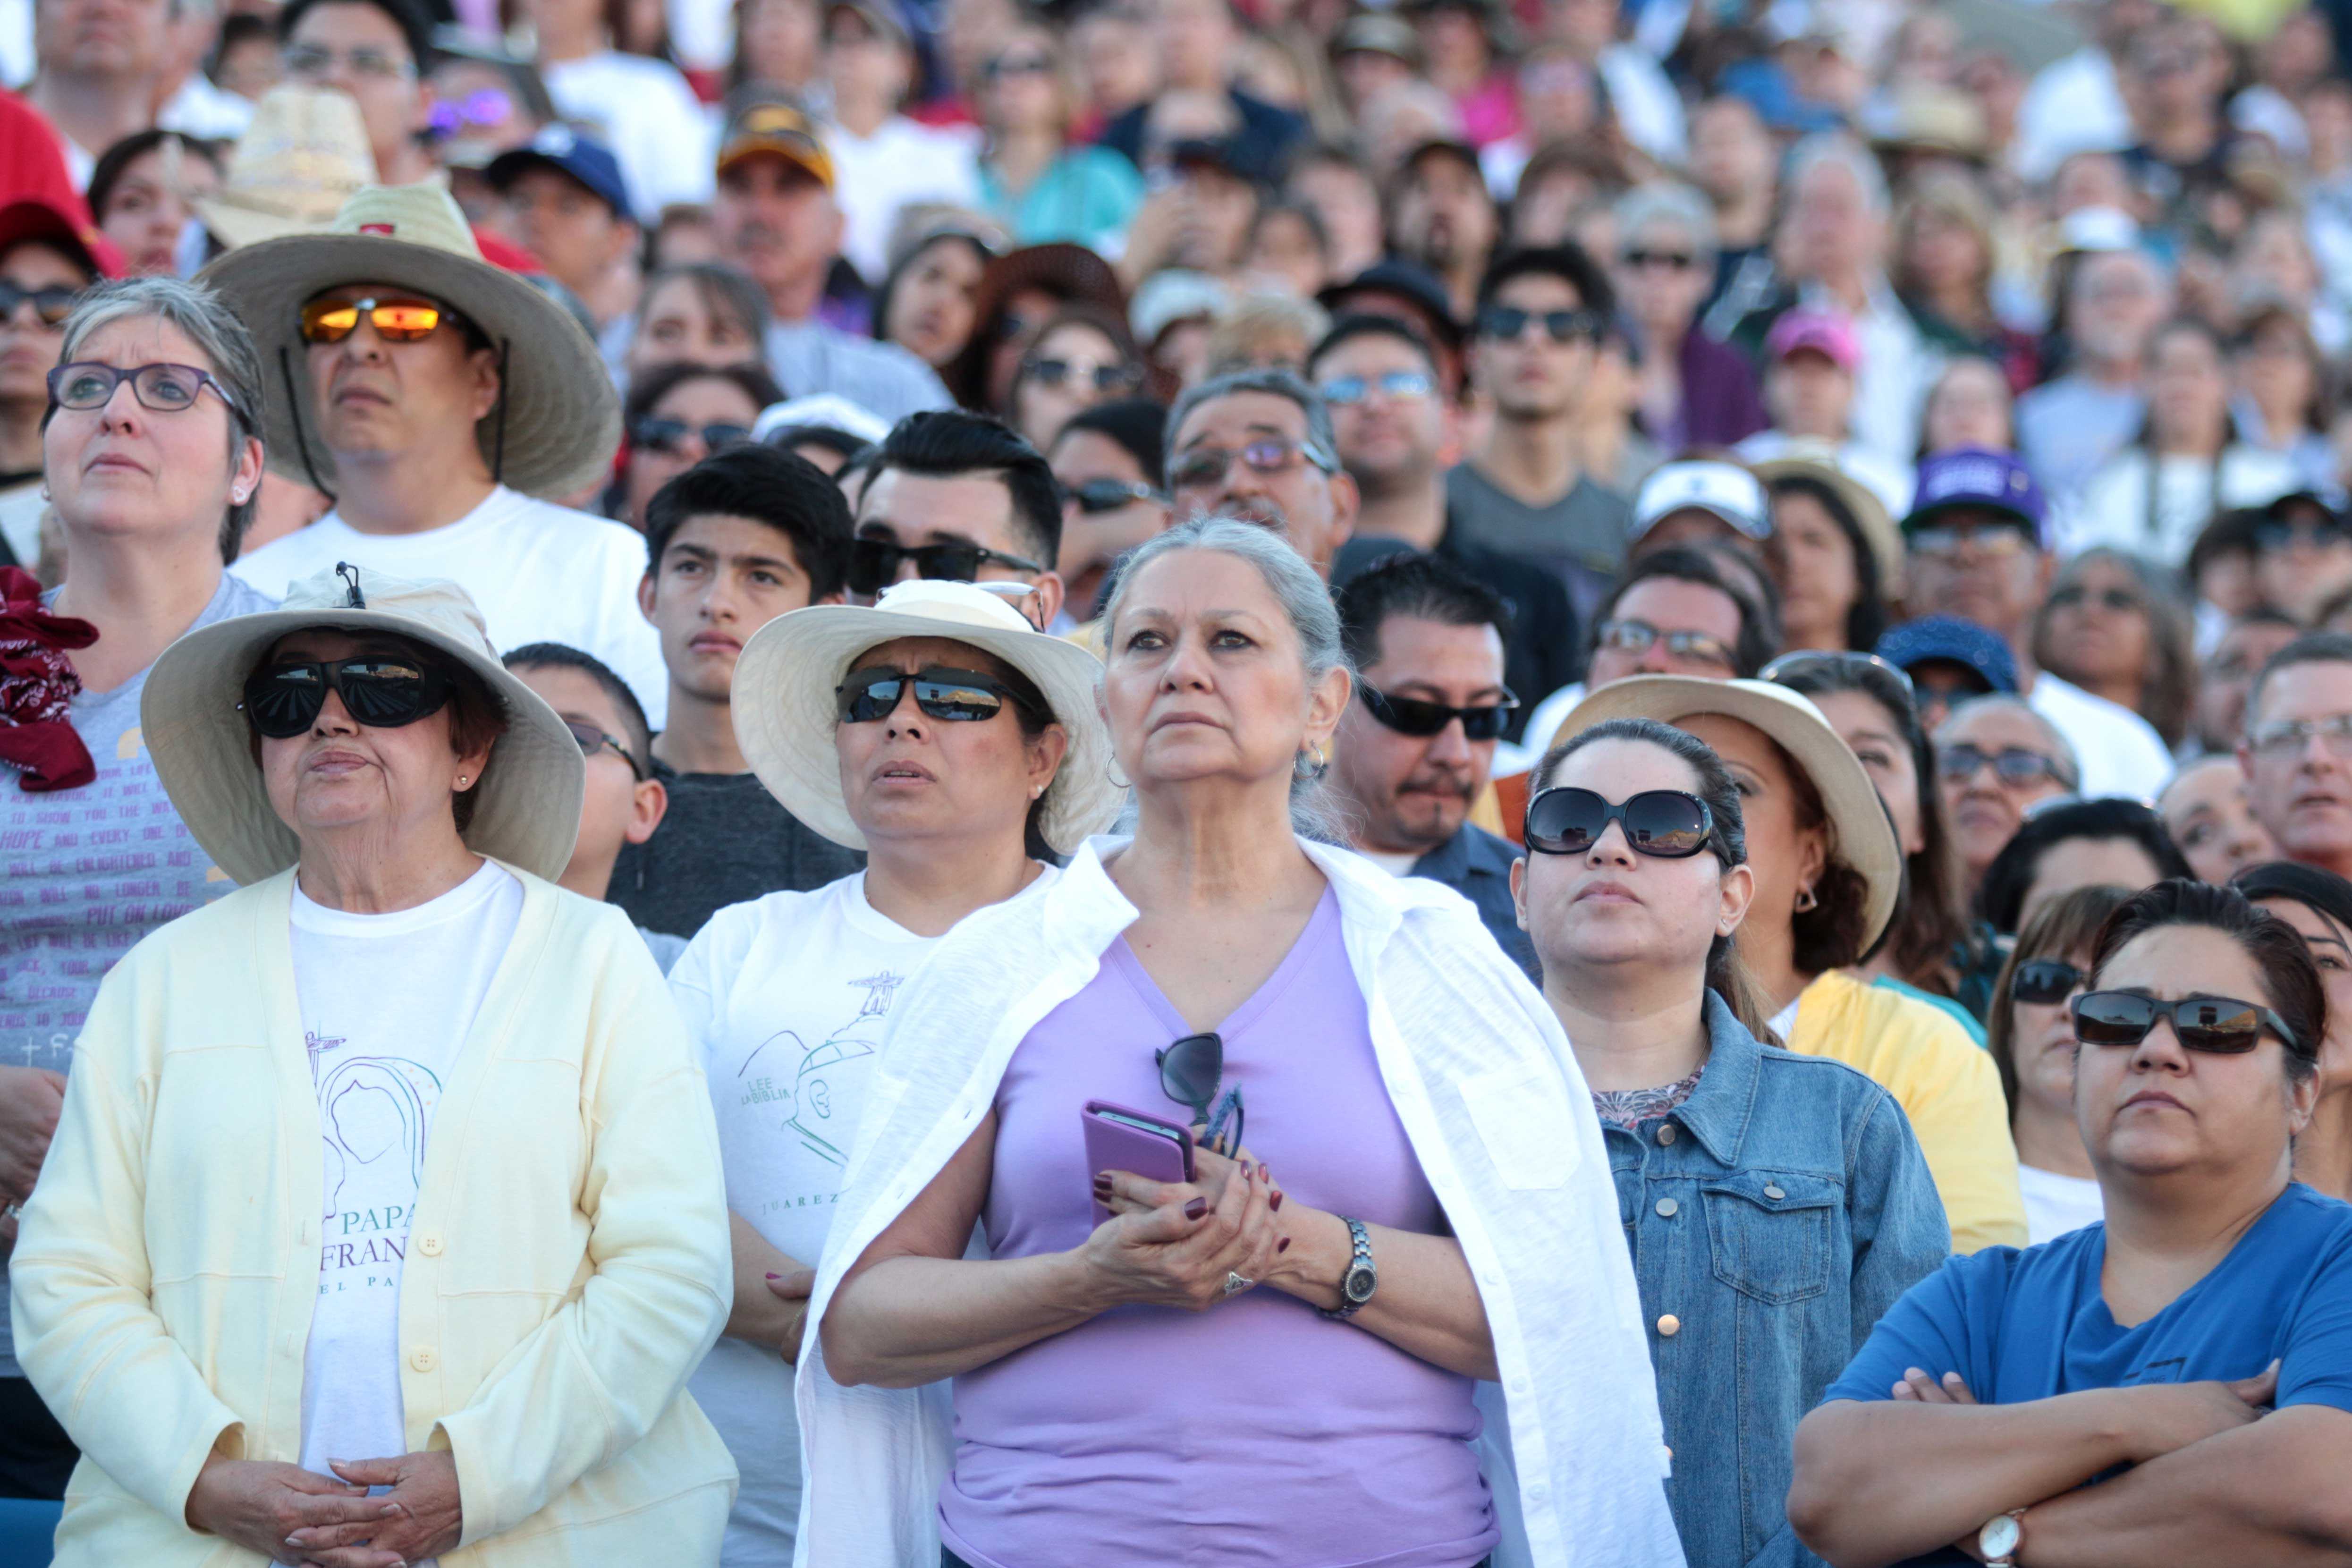 Sun+Bowl+joins+Juarez+in+welcoming+Pope+Francis